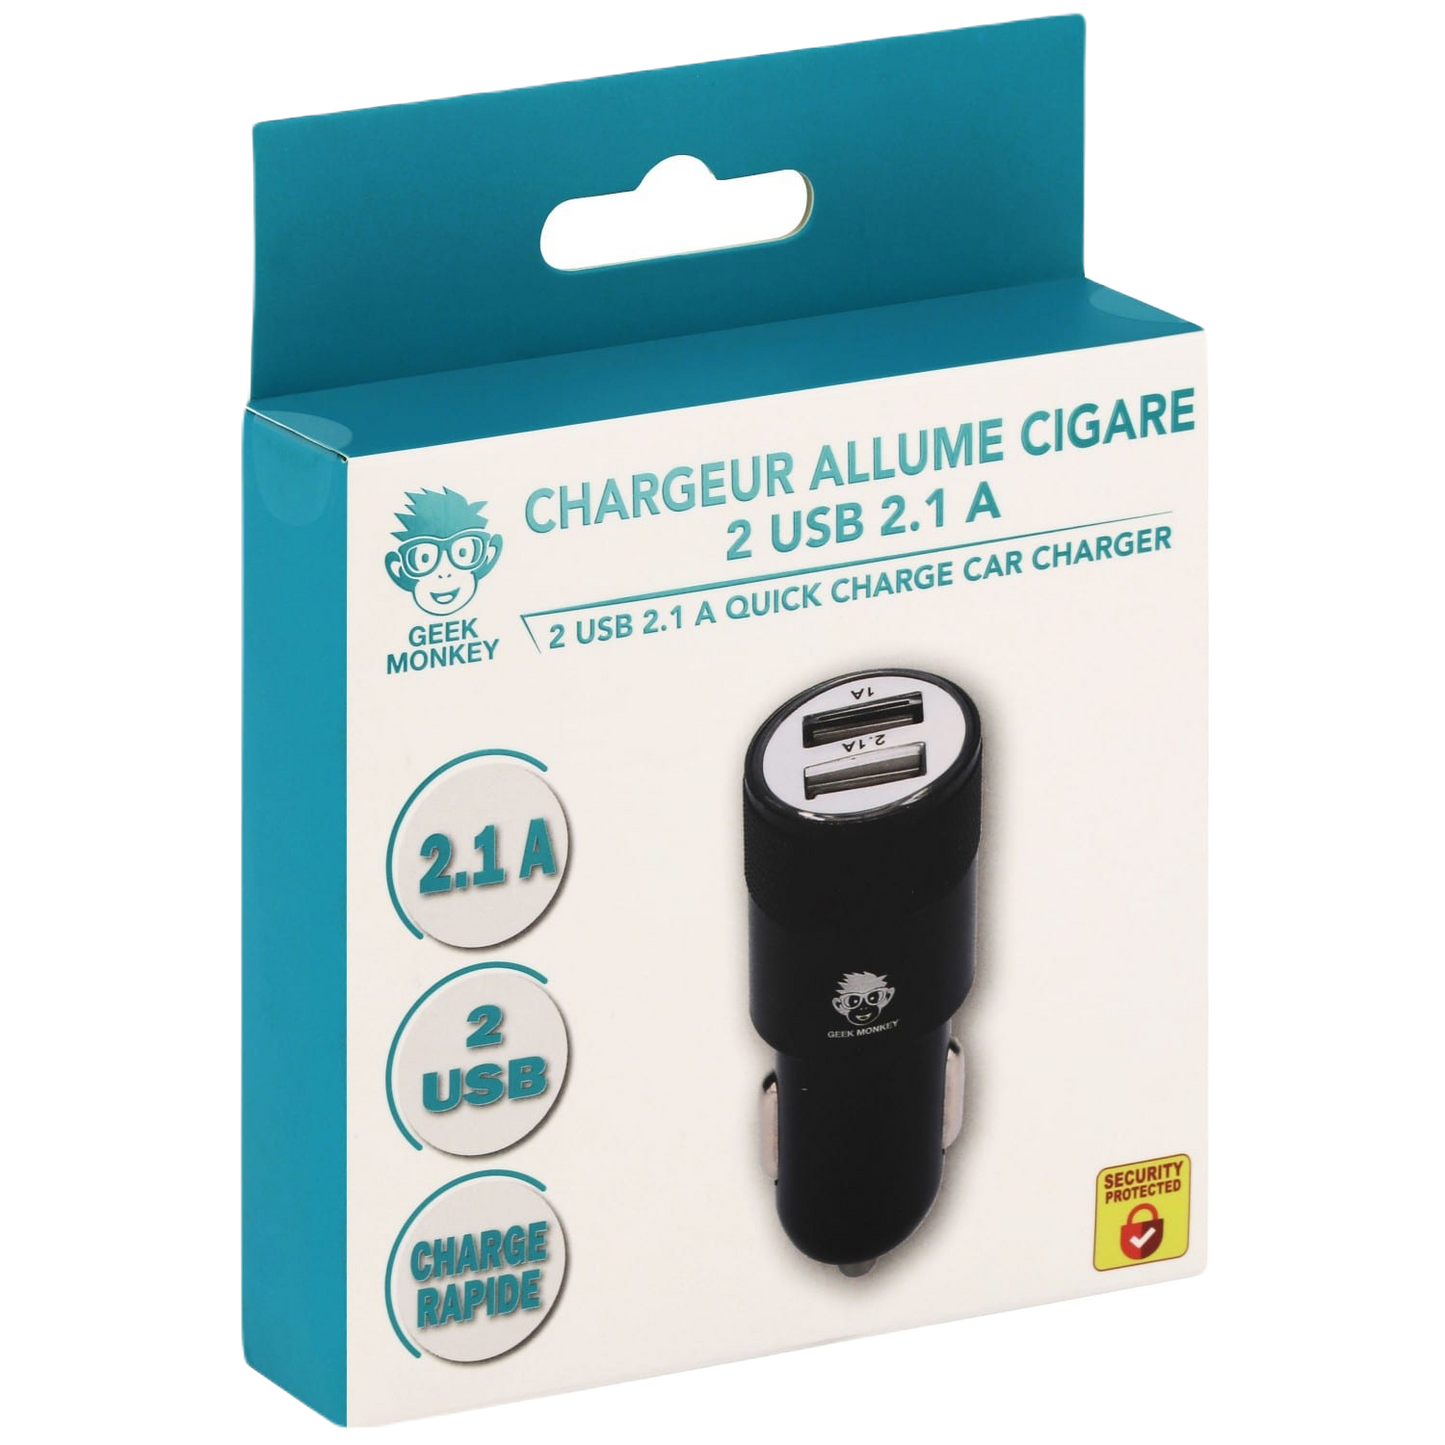 Chargeur allume-cigare 1 USB GEEK MONKEY